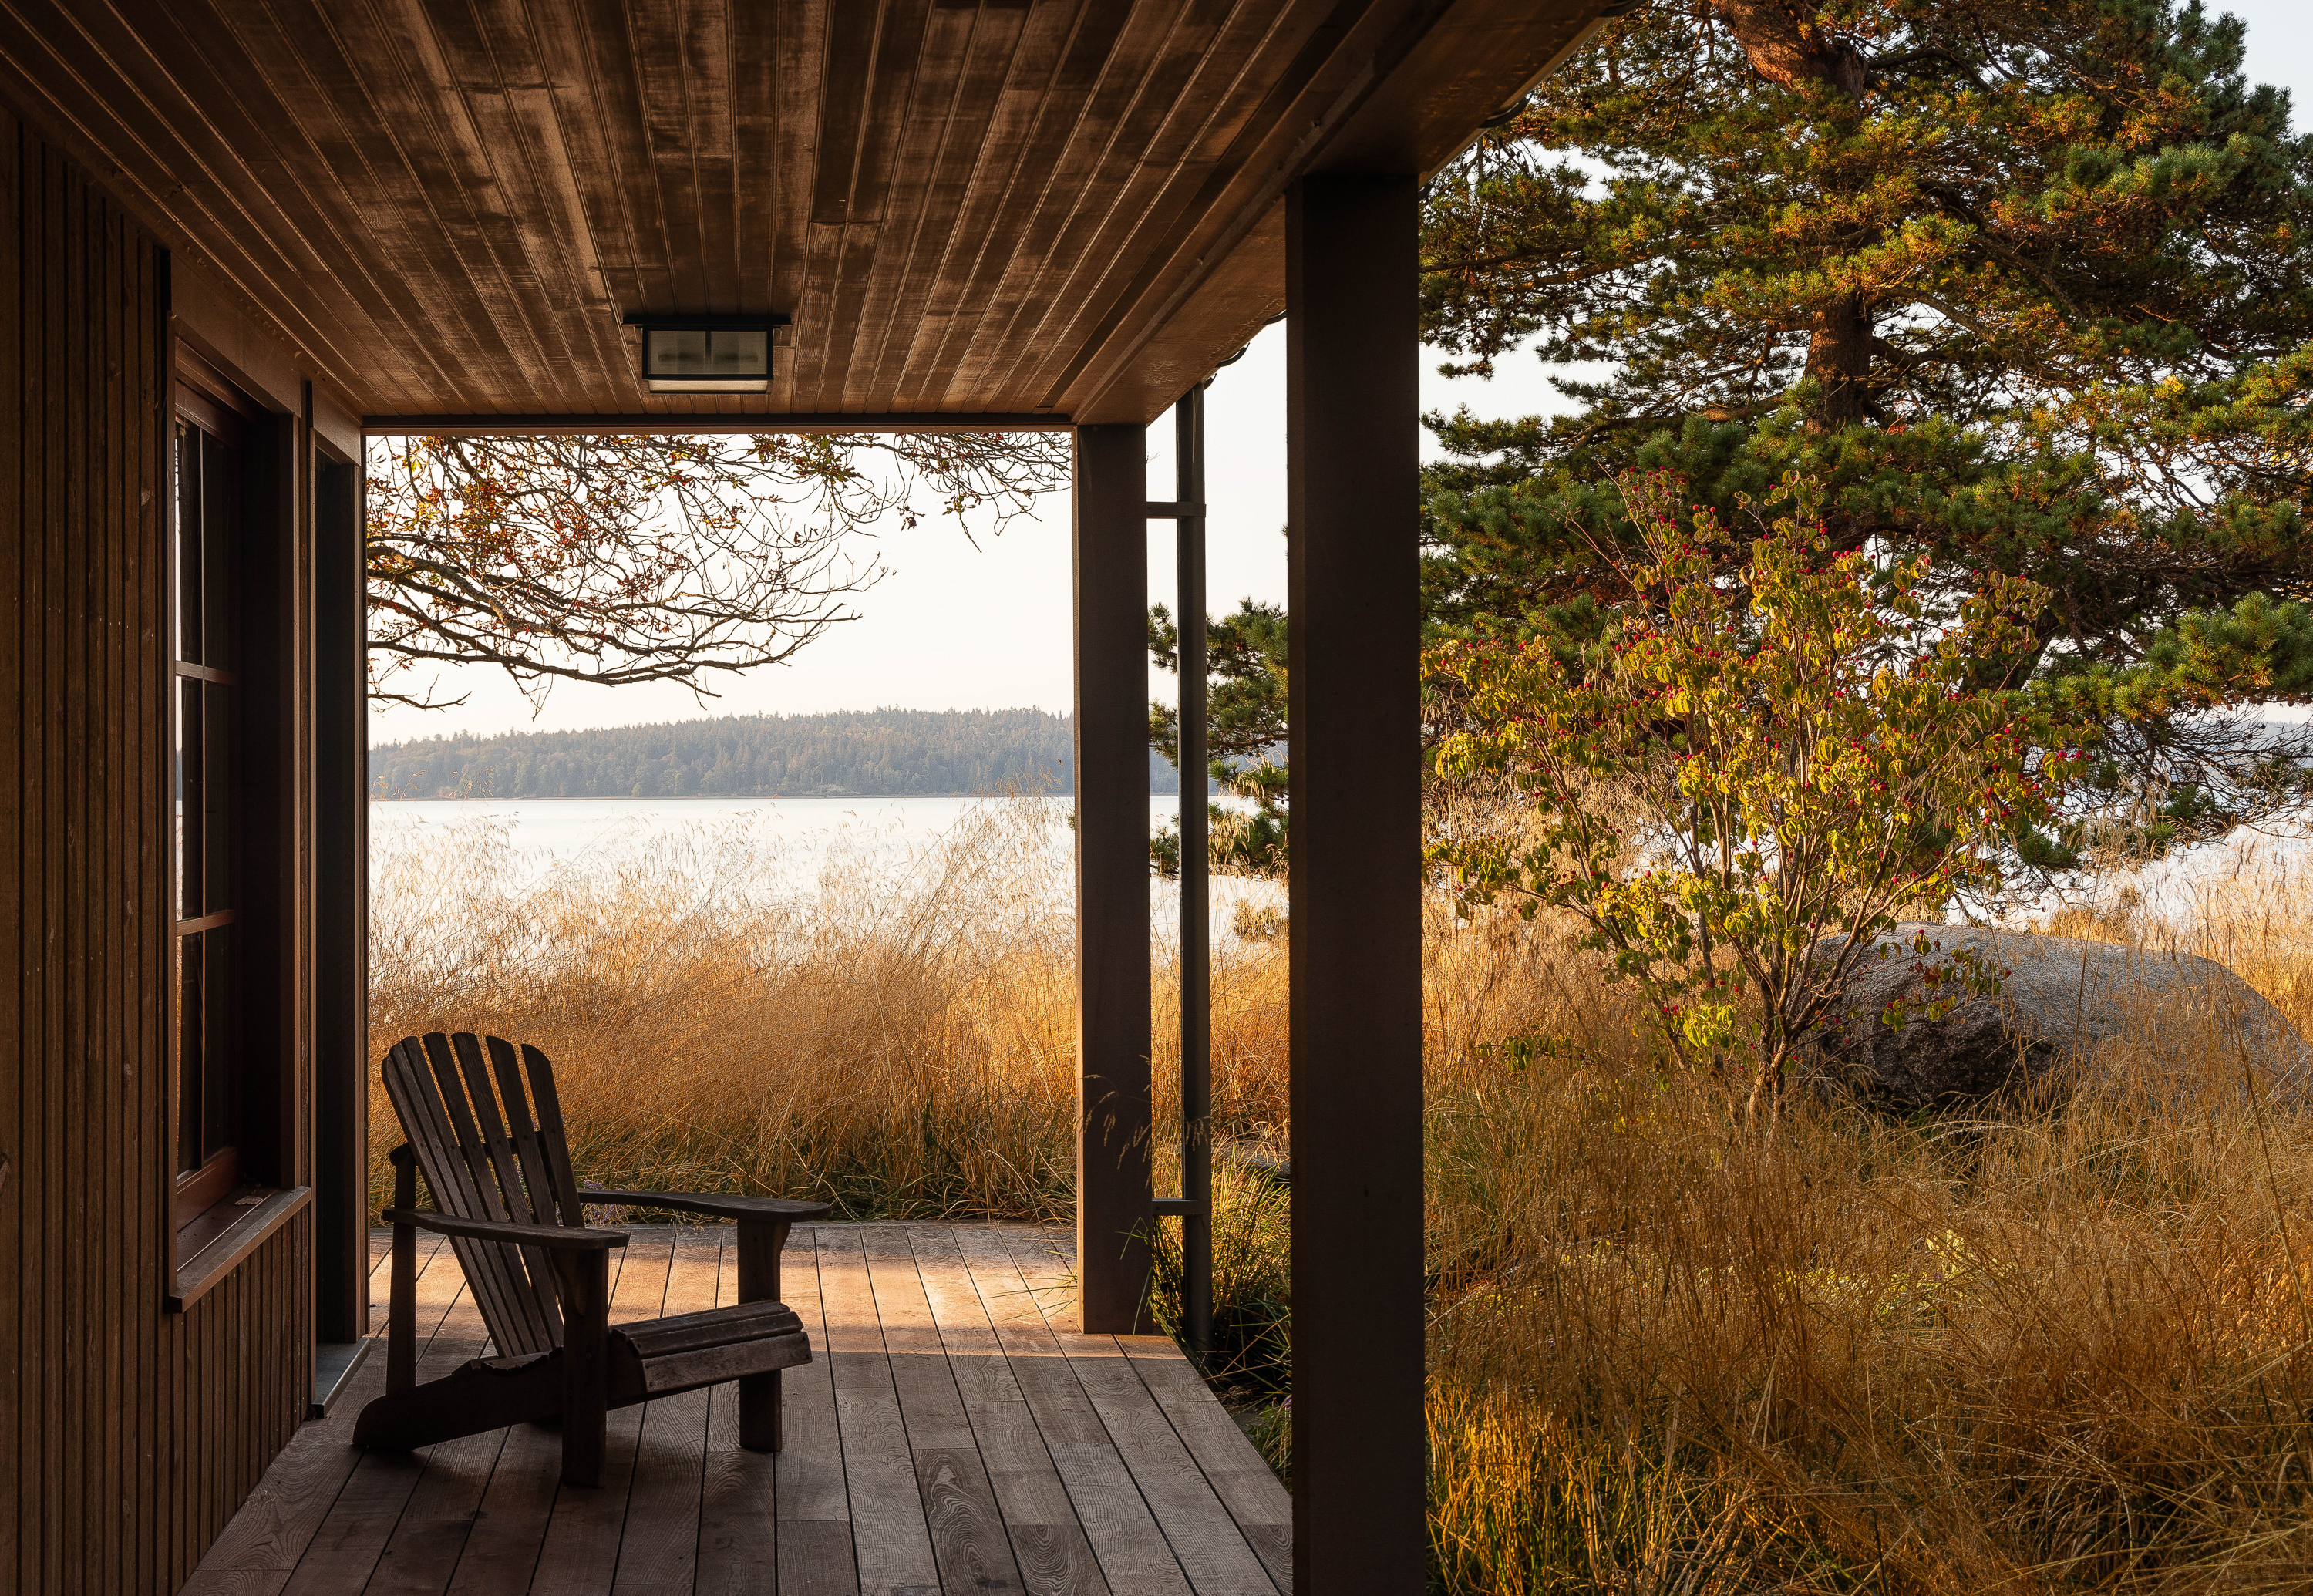 View from the studio building porch, featuring a solitary Adirondack chair beneath the covered area, offering a serene spot to enjoy the picturesque view of Puget Sound